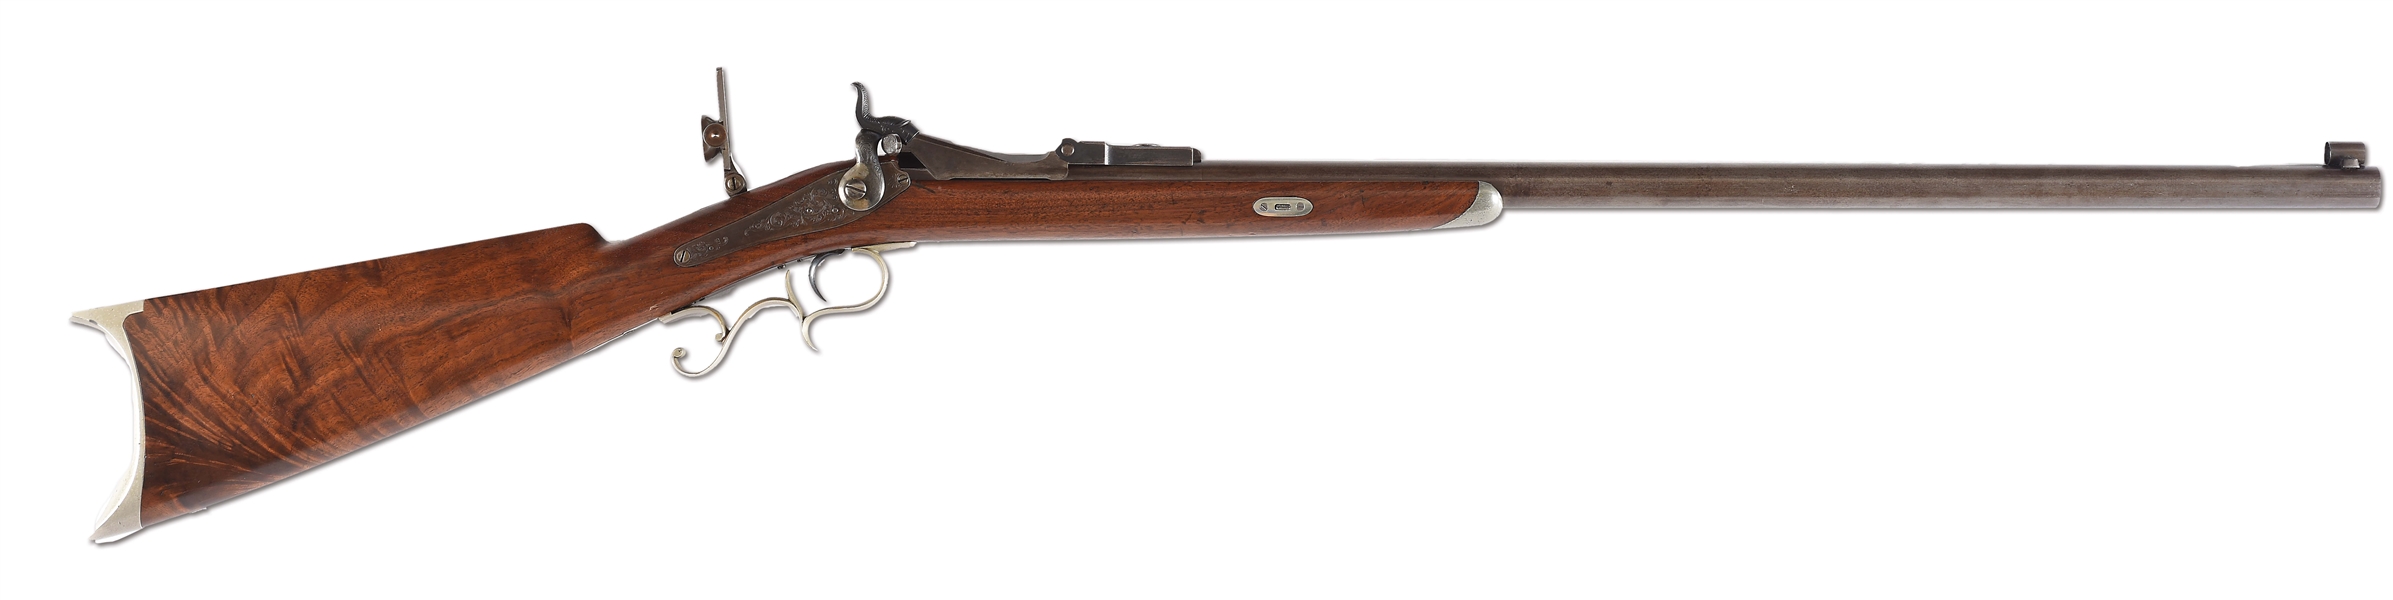 (A) INCREDIBLE ENGRAVED COLT BERDAN TRAPDOOR RIFLE SERIAL NUMBER 1 OF 1 WITH DISPLAY MATERIALS.